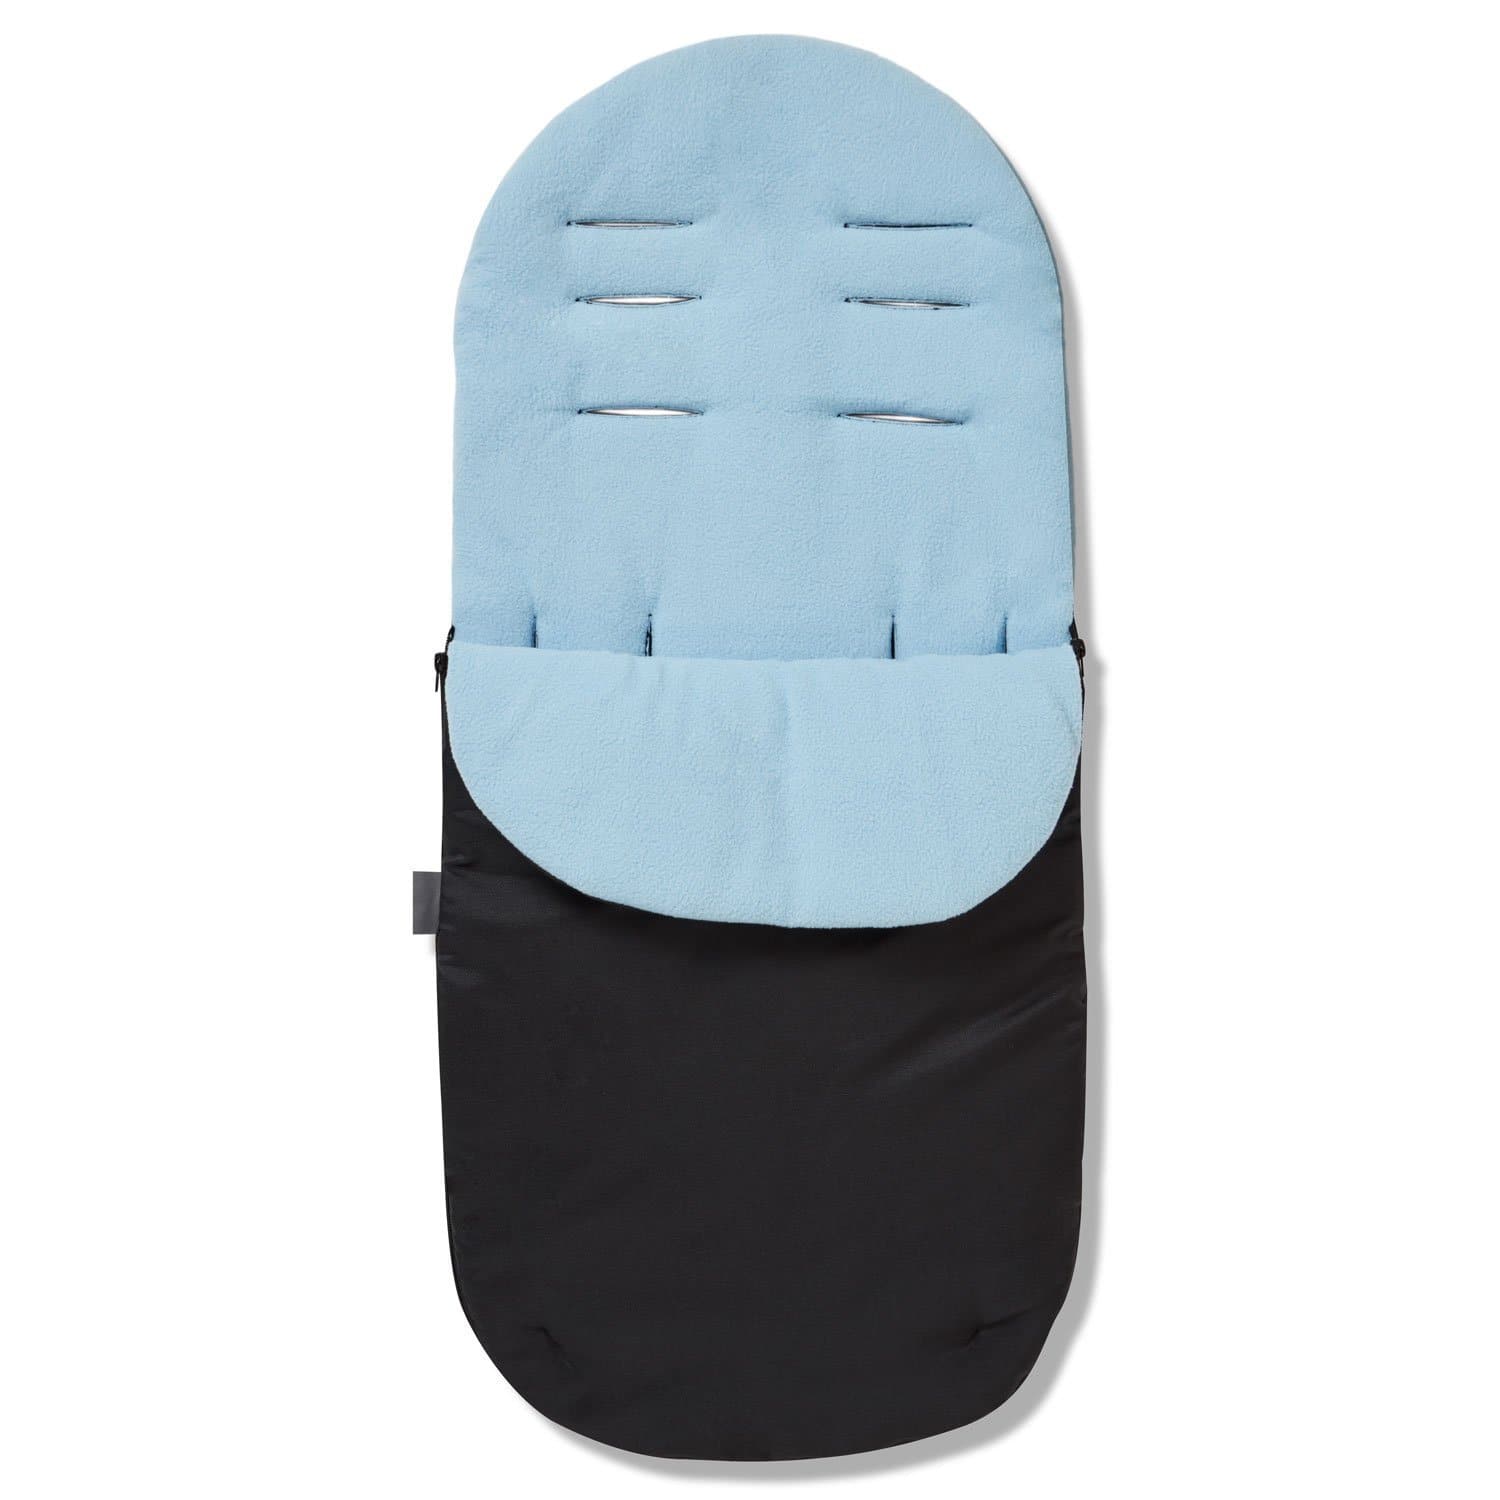 Footmuff / Cosy Toes Compatible with Bebecar - Light Blue / Fits All Models | For Your Little One